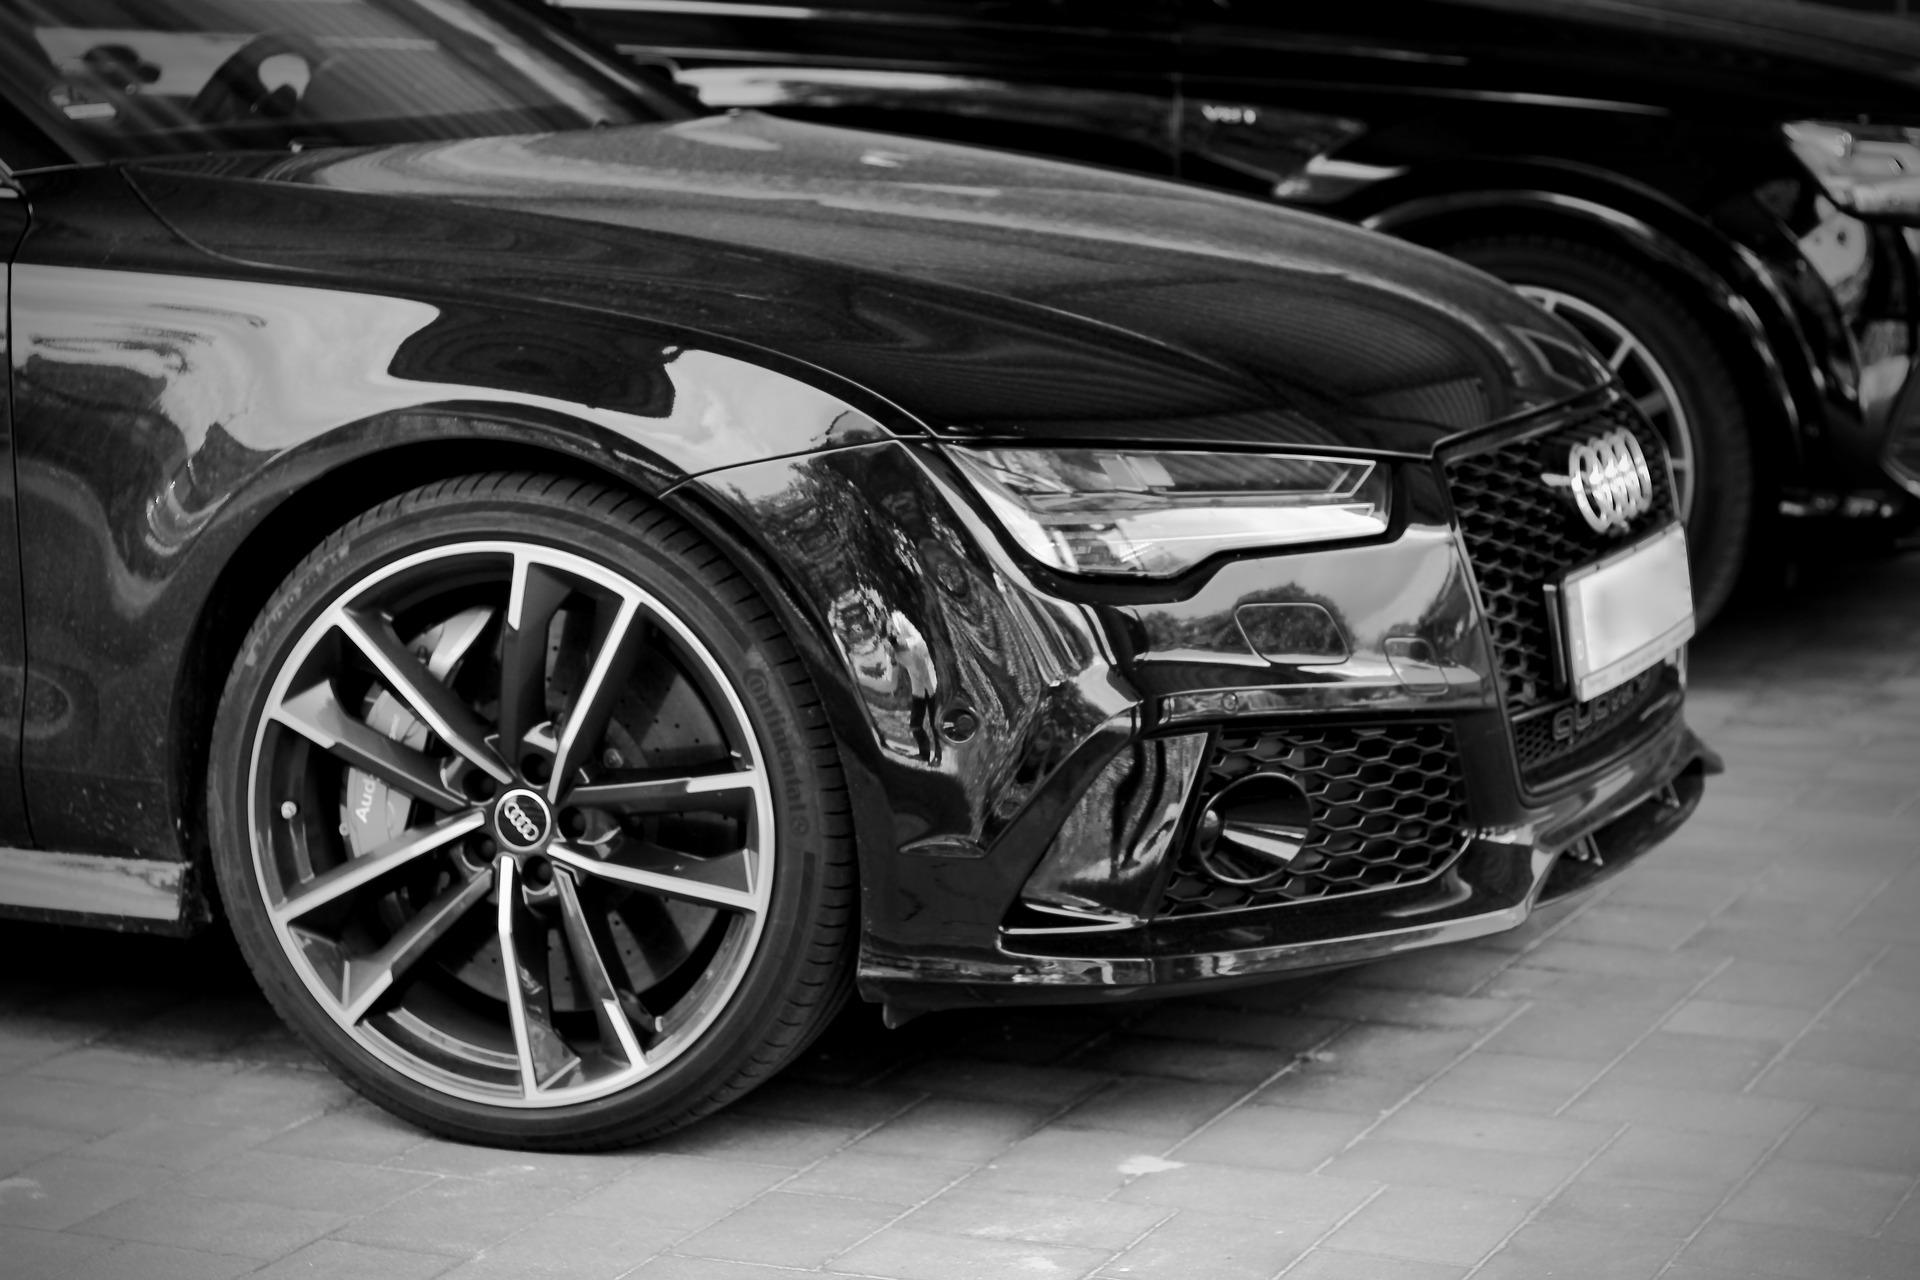 Is the Audi RS5 really worth 20 grand more than the capable S5?